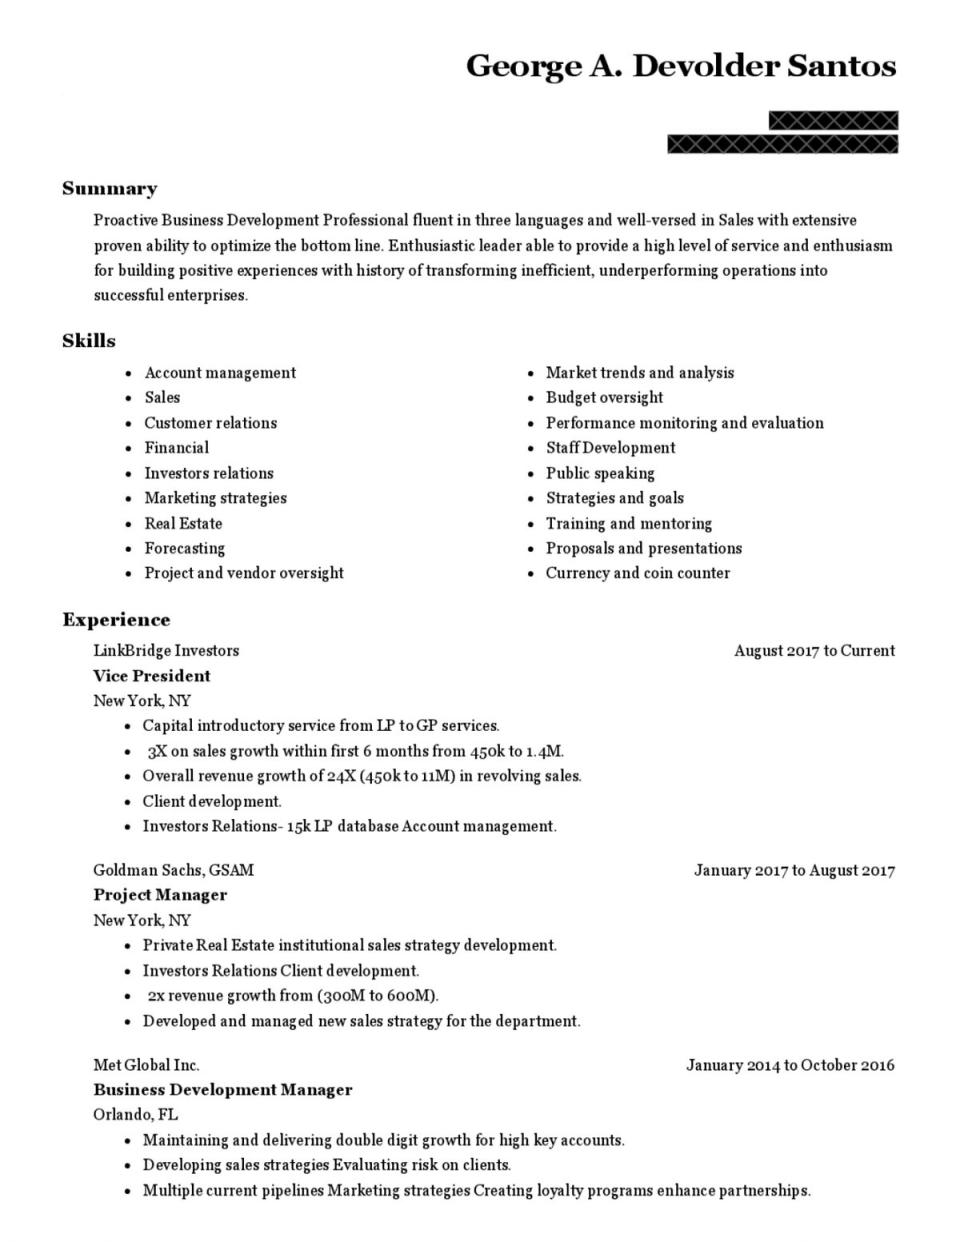 George Santos’s resume, obtained by The New York Times (The New York Times)